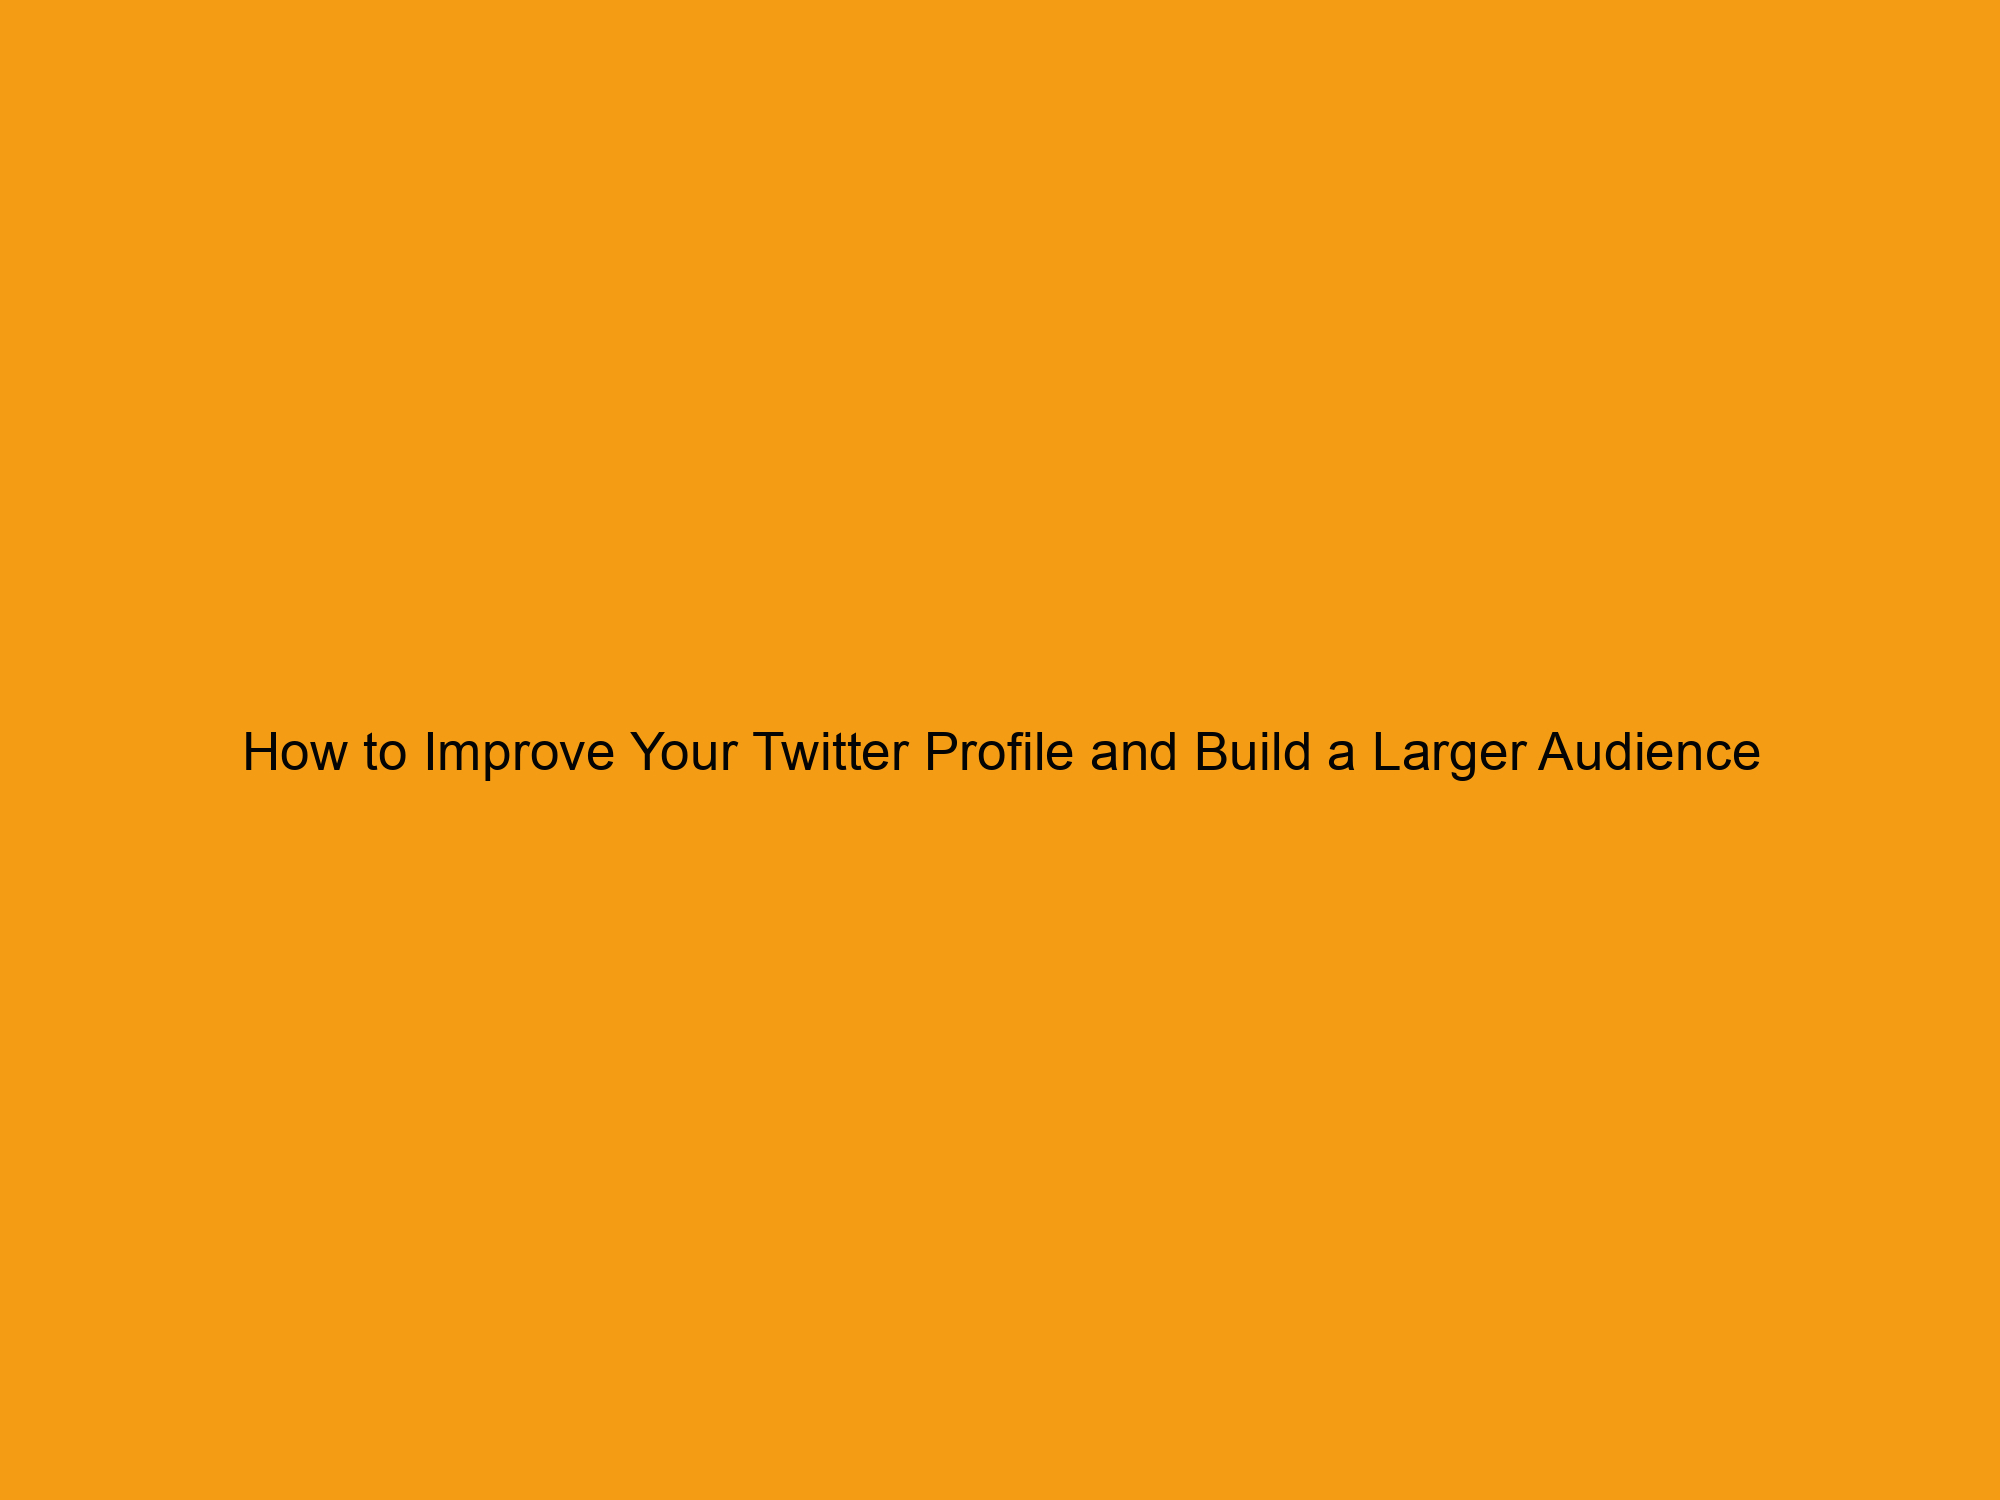 How to Improve Your Twitter Profile and Build a Larger Audience